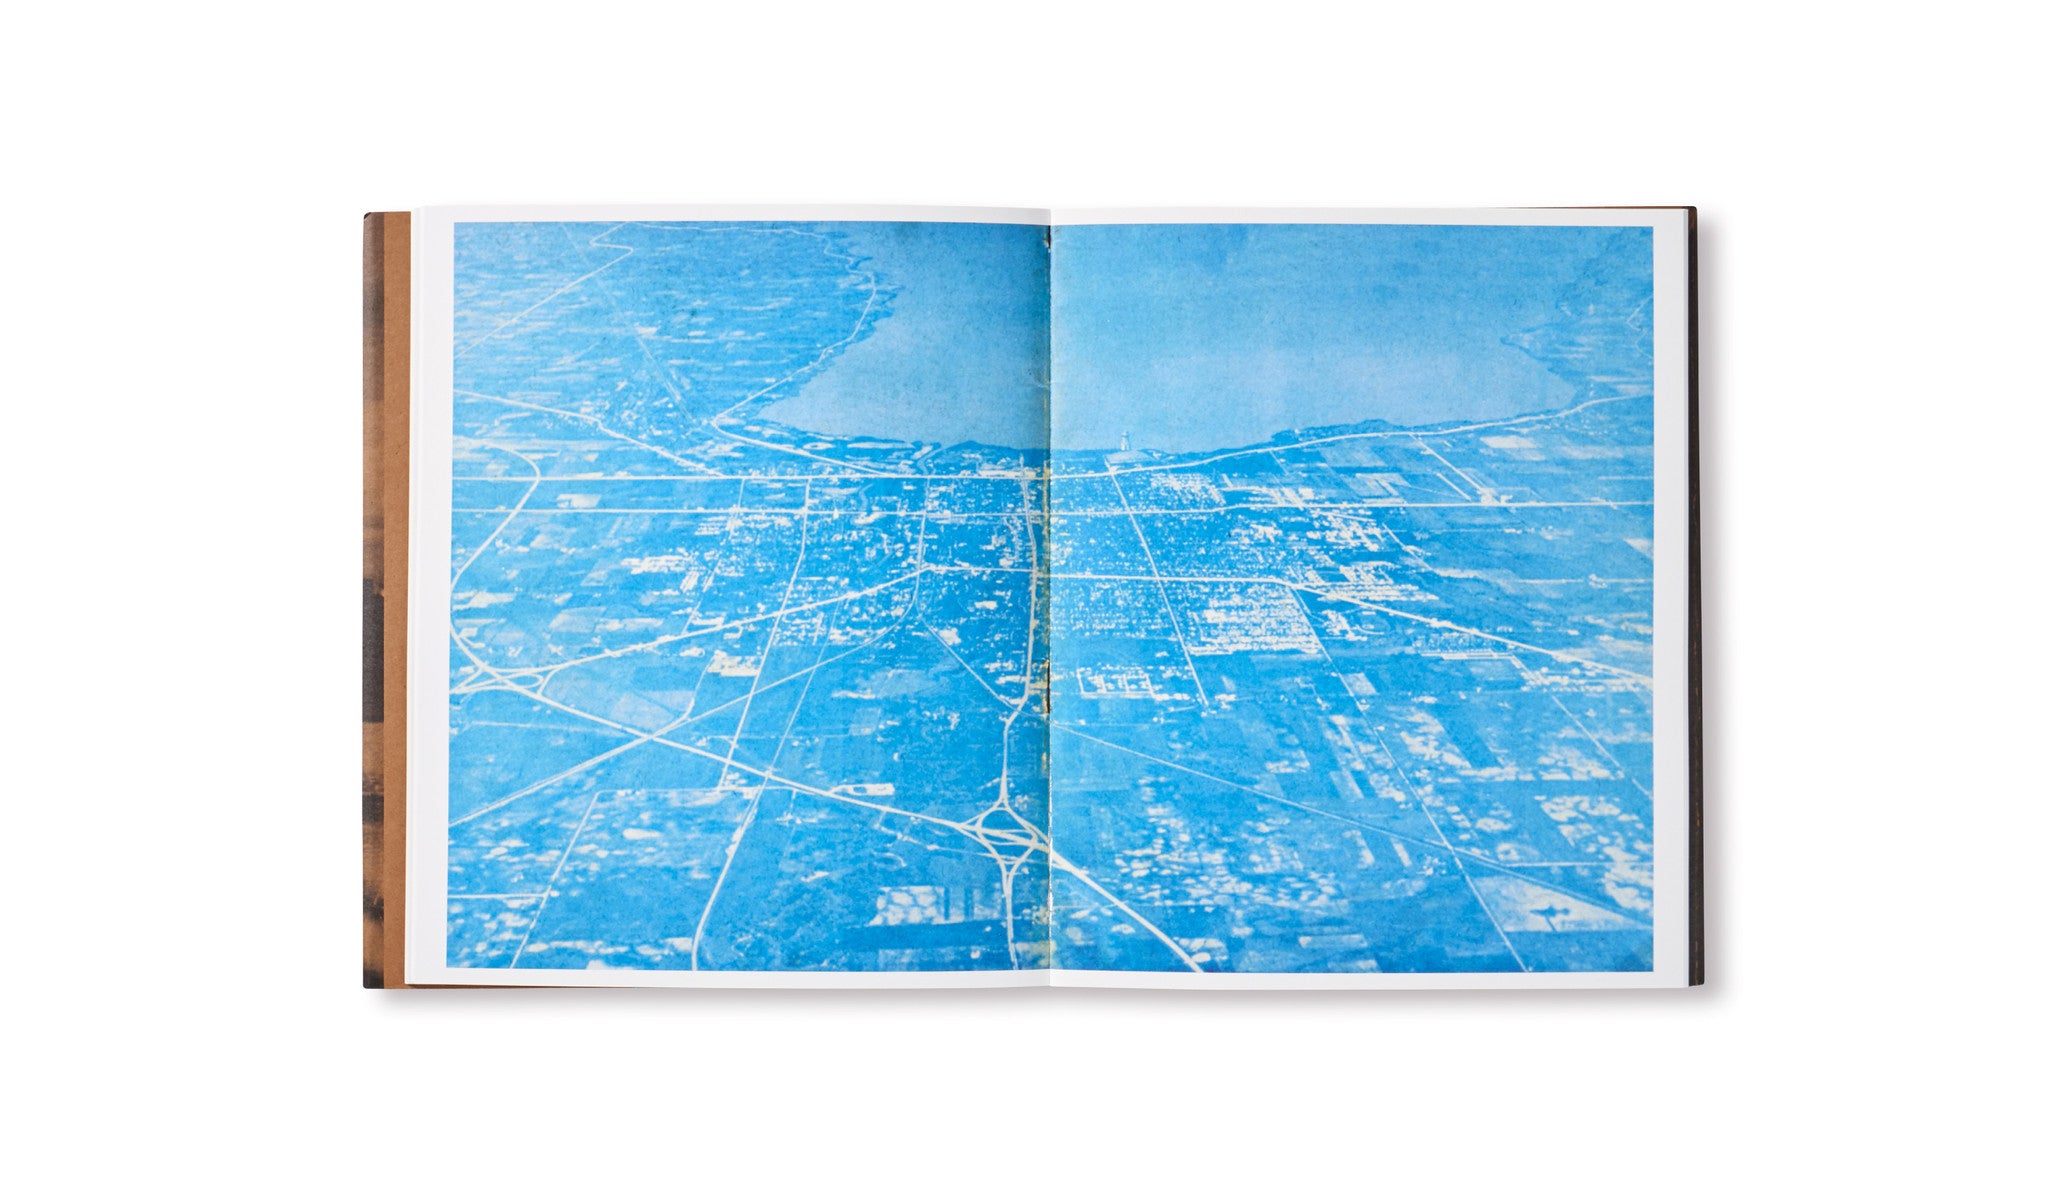 SUBSCRIPTION SERIES #4 by Christian Patterson, Alessandra Sanguinetti, Raymond Meeks and Wolfgang Tillmans